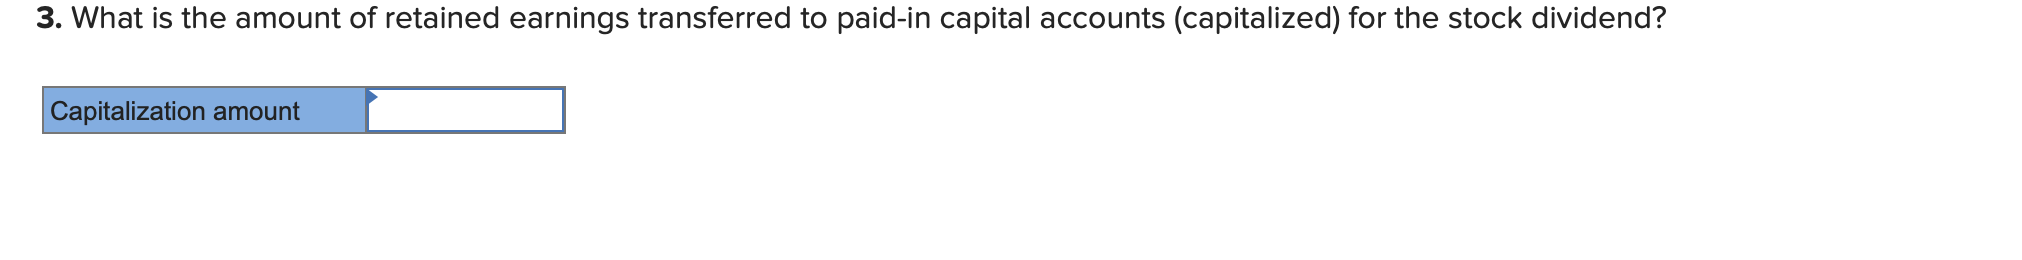 3. what is the amount of retained earnings transferred to paid-in capital accounts (capitalized) for the stock dividend? capi